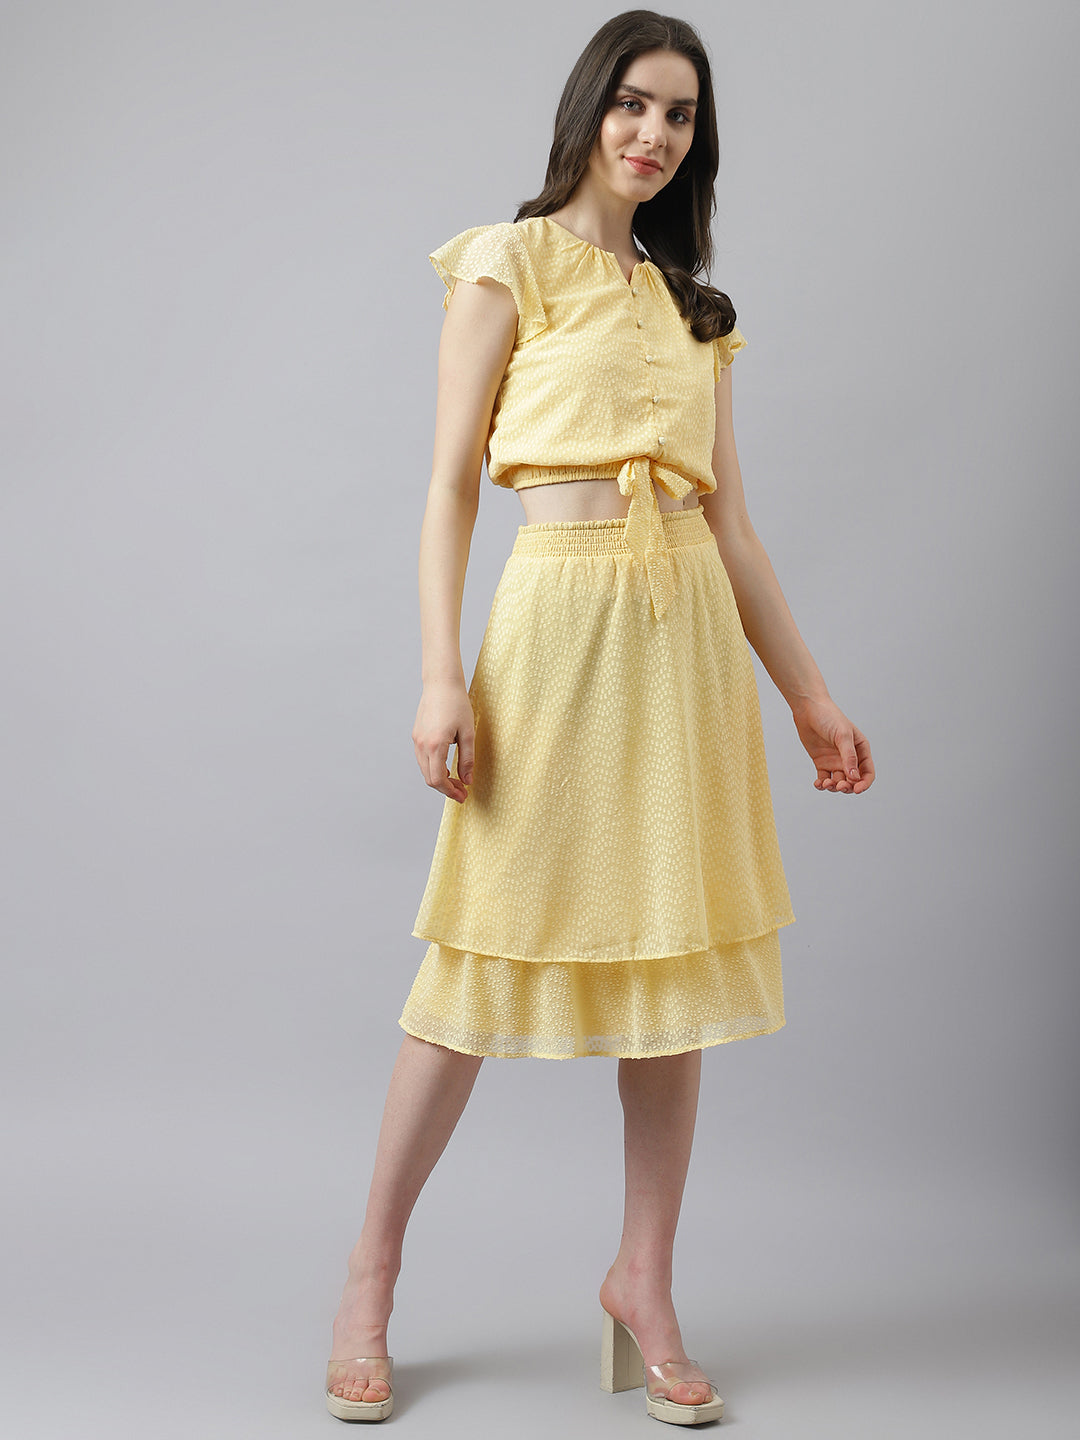 Yellow Co Ord Set With A-Line Skirt And Knotted Top With Cap Sleeves